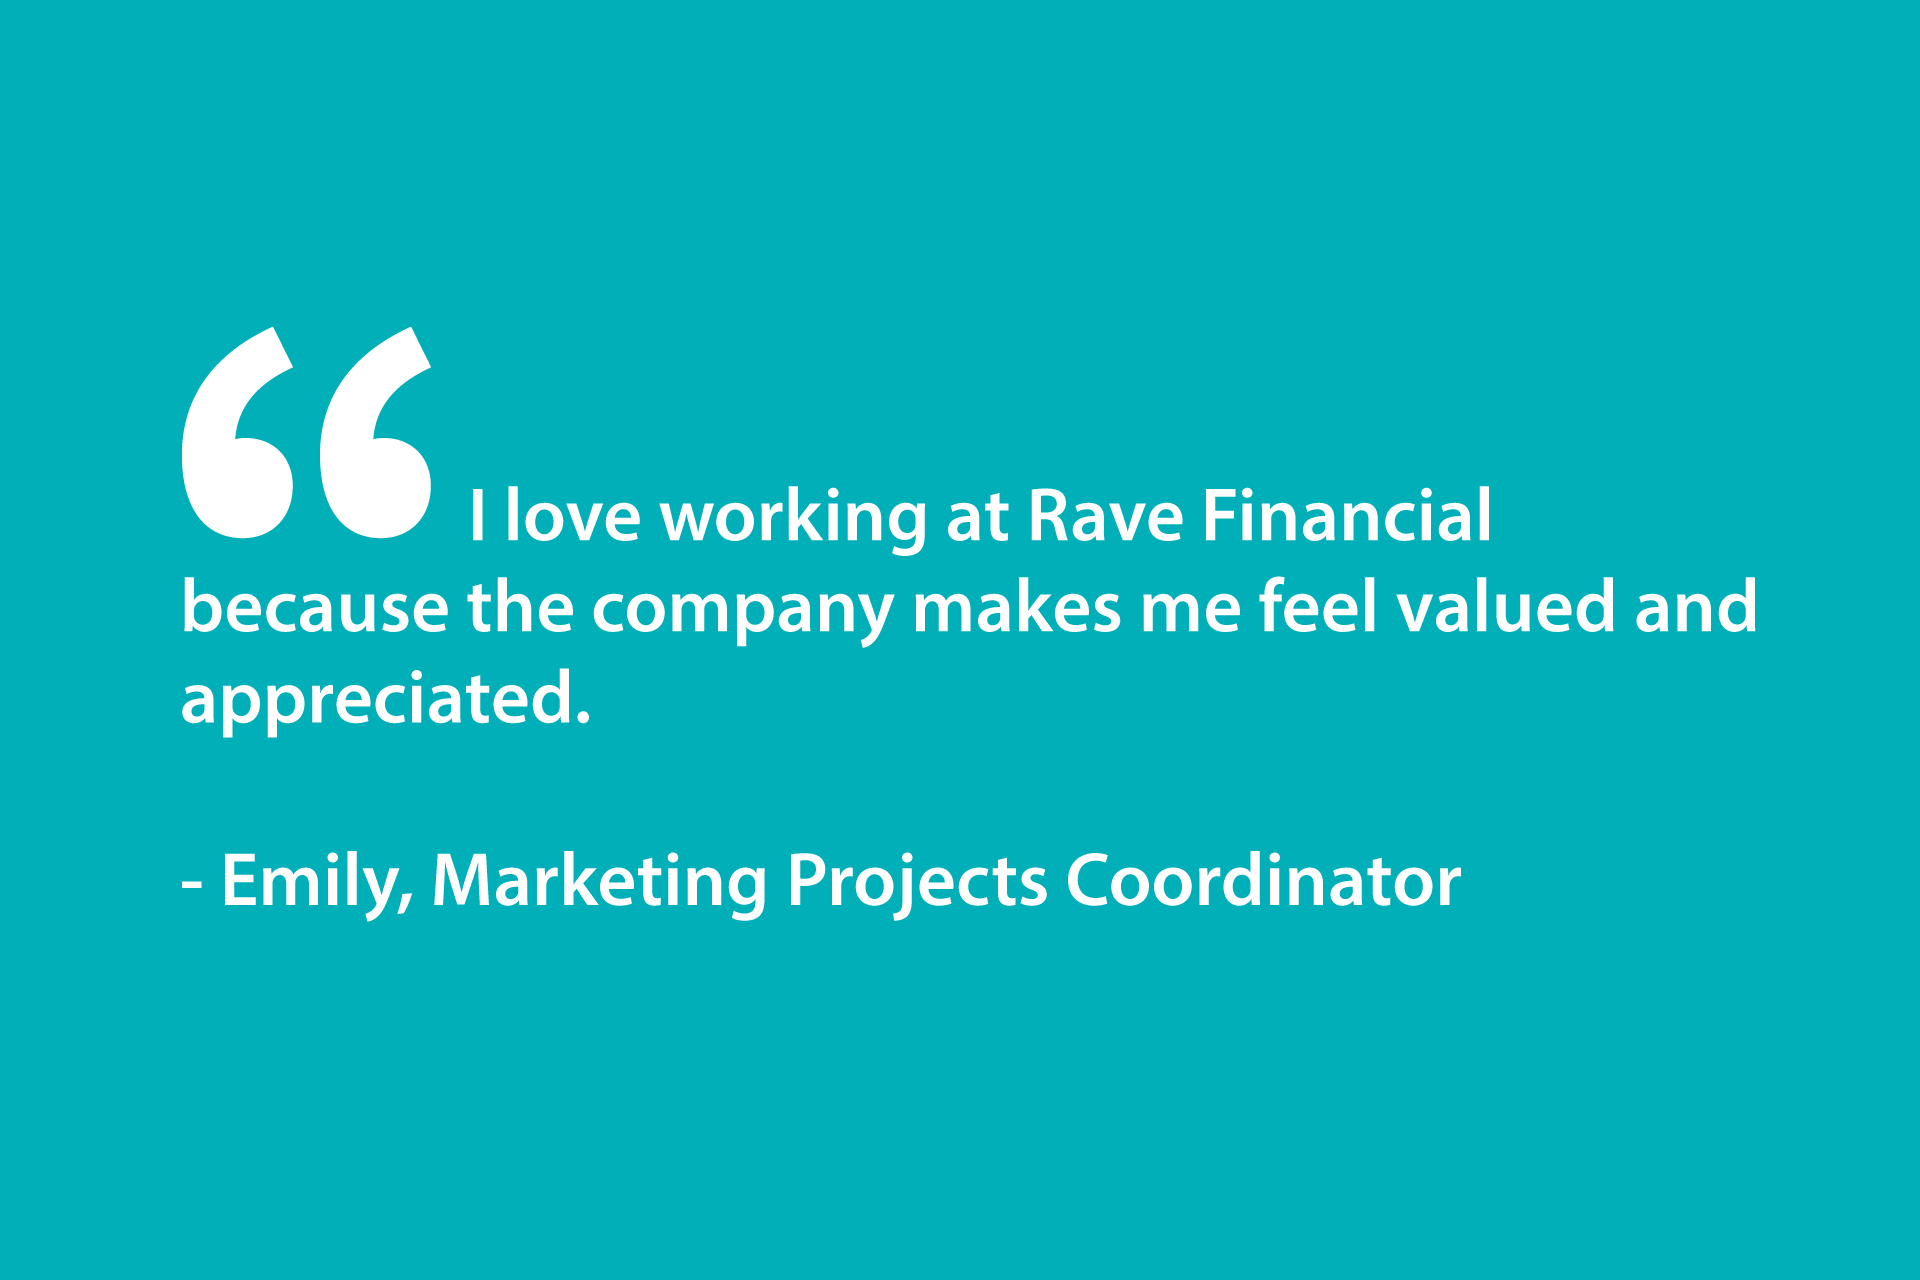 I love working at Rave Financial because the company makes me feel valued and appreciated. - Emily, Marketing Projects Coordinator